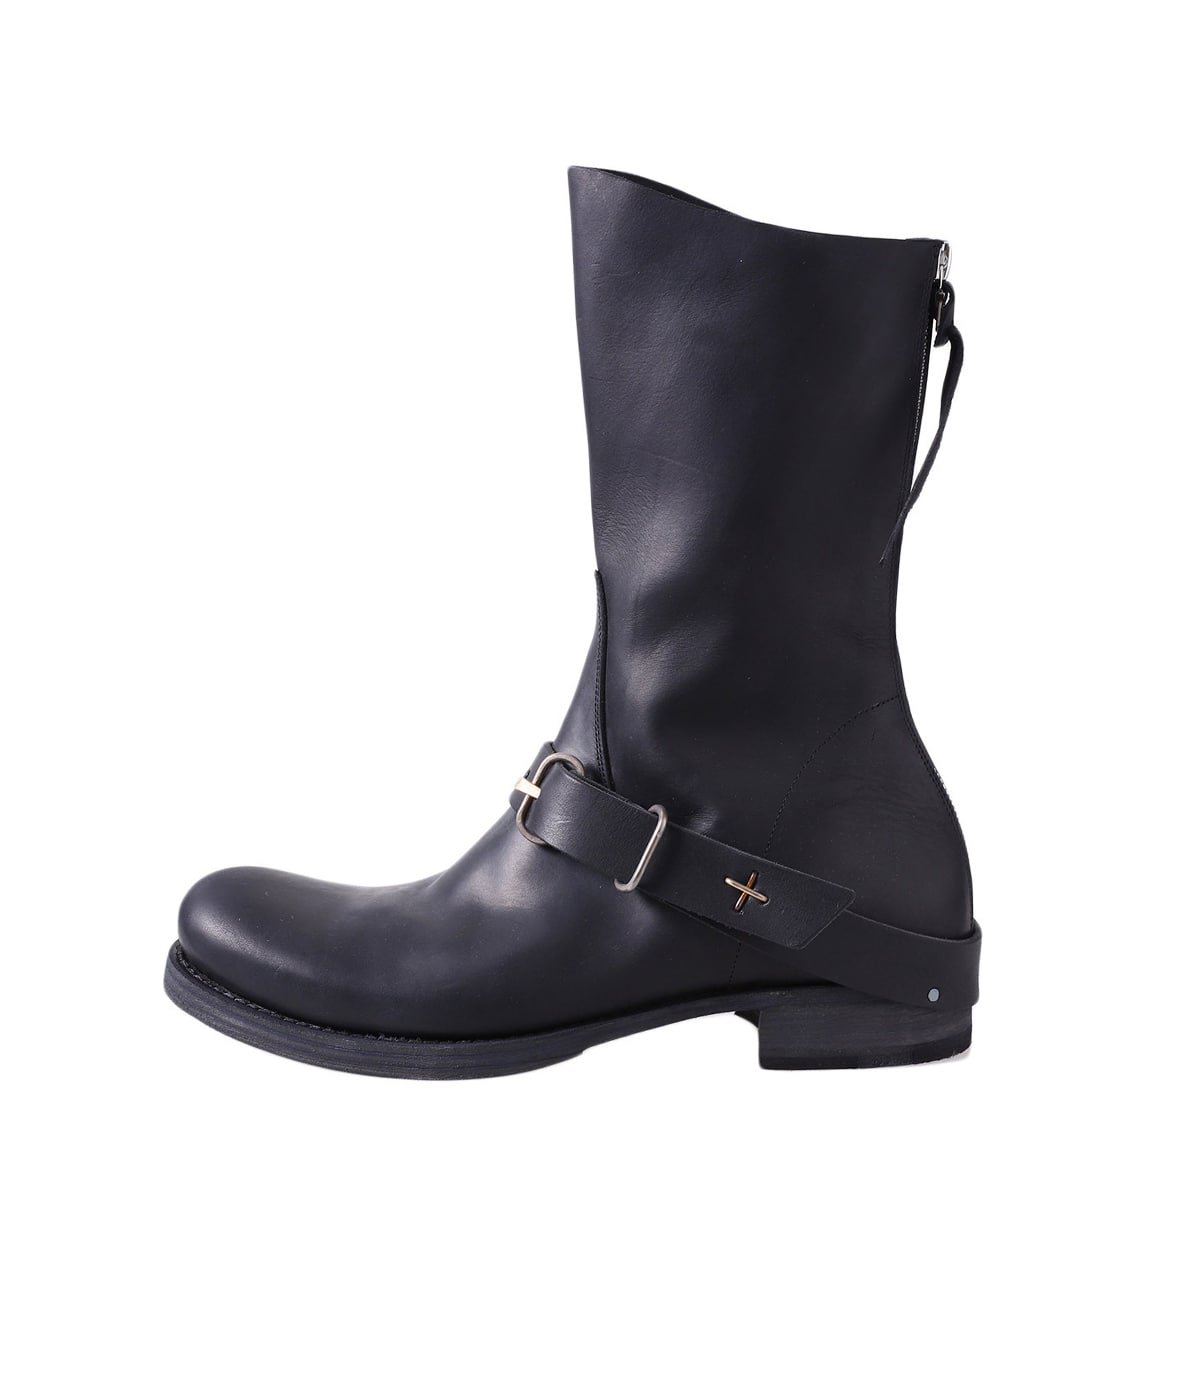 goodyear tall buckle back zipper boots | m.a+(エムエークロス